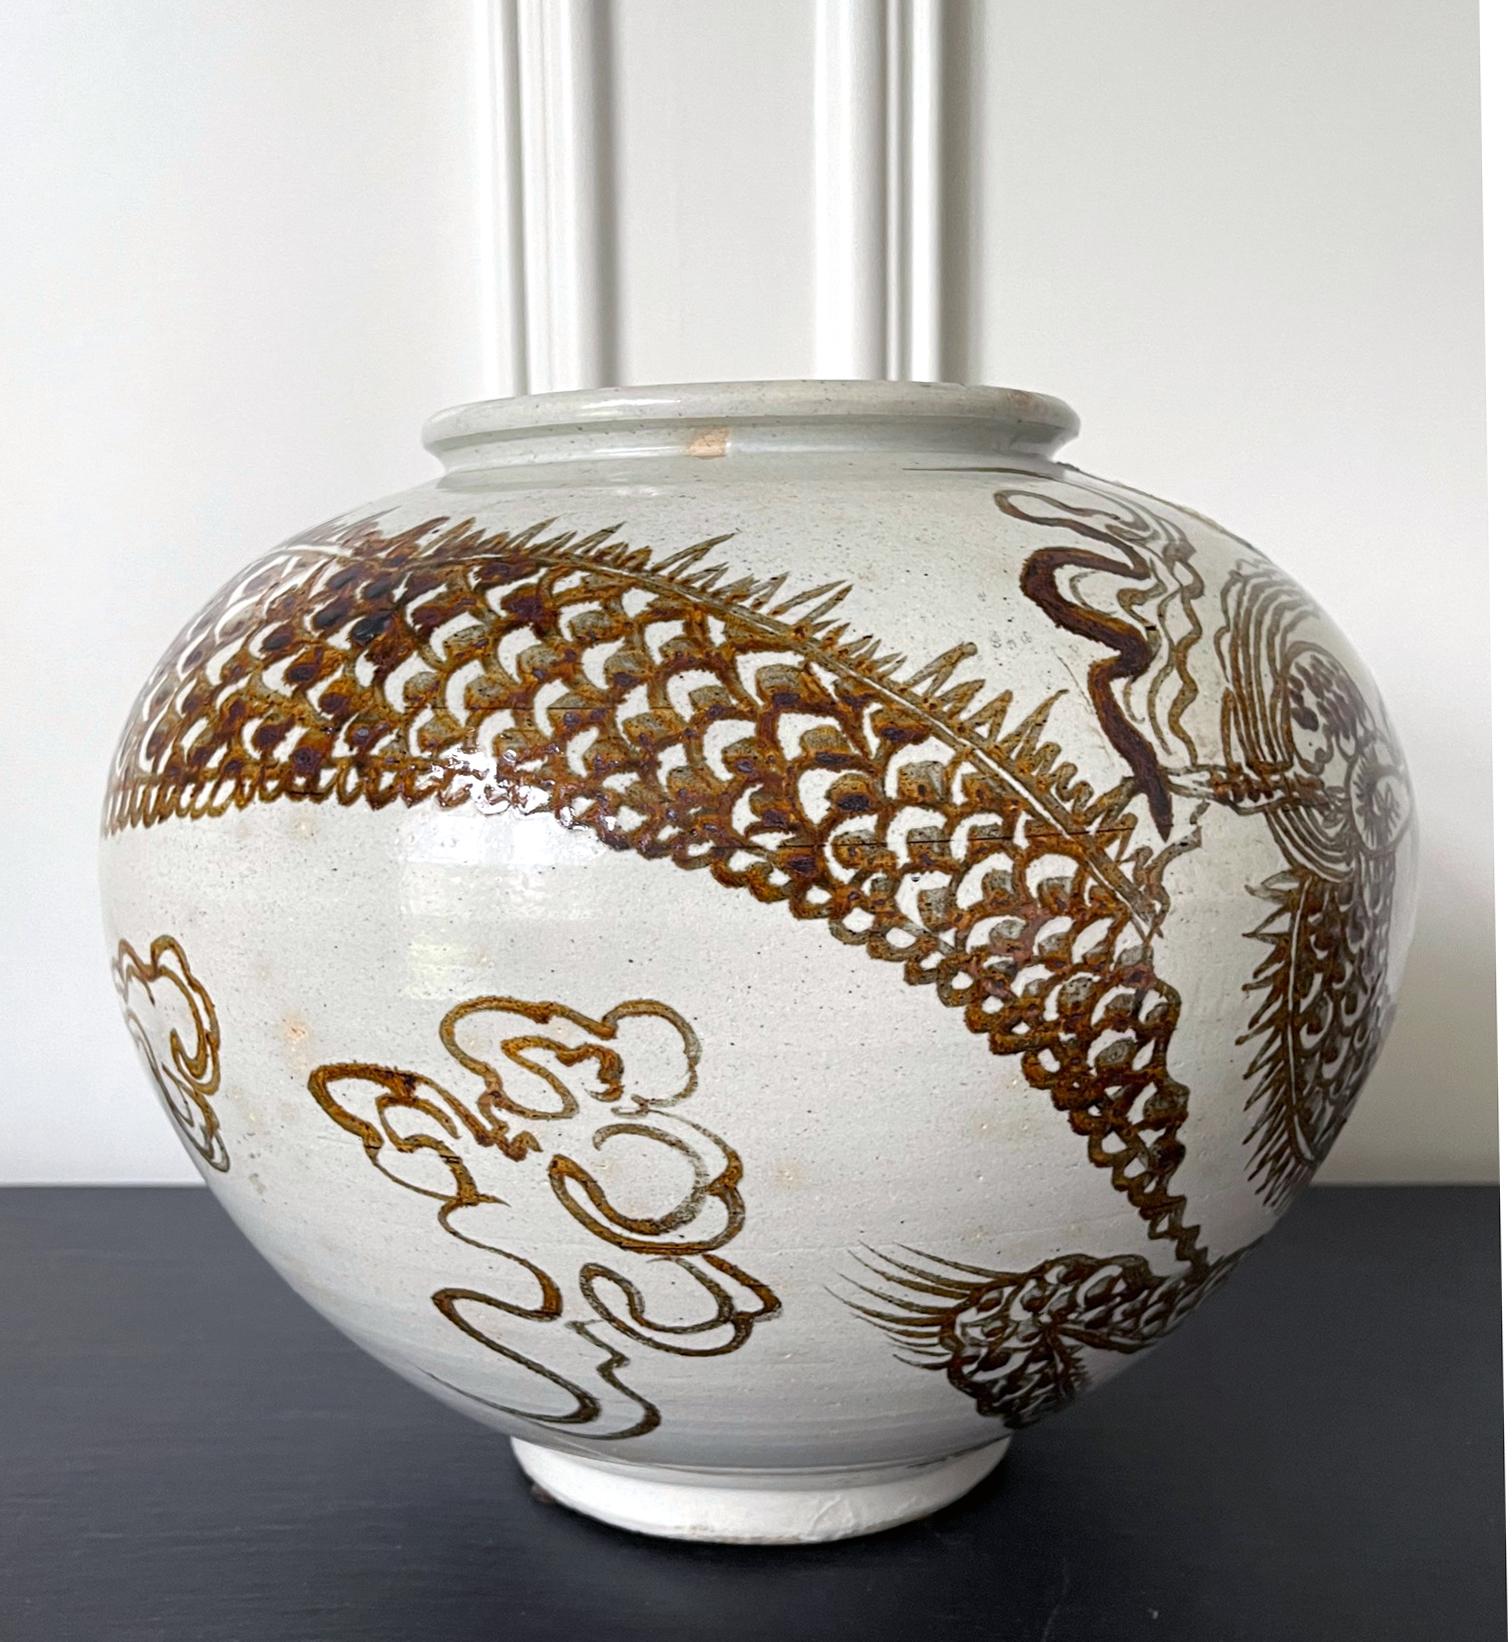 On offer is a large Korean ceramic storage jar (hangari) with white glaze and iron red underglaze dragon design. The globular shaped jar derived its form from the Moon Jar of the early Joseon dynasty, which were fused with two hemispheres and mostly